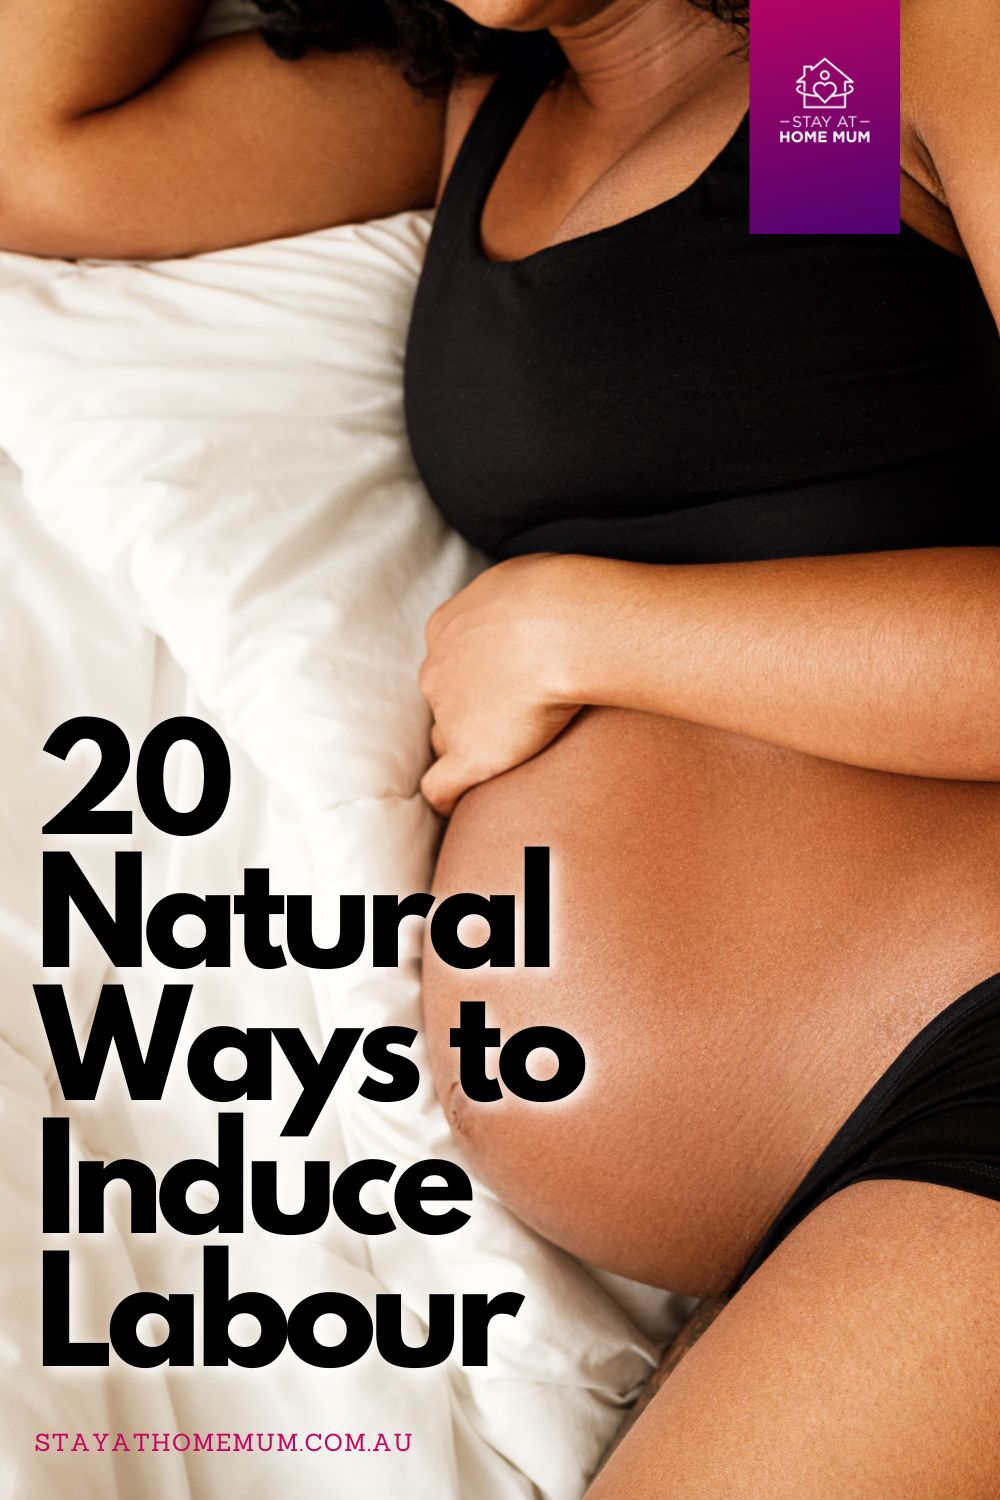 20 Natural Ways to Induce Labour | Stay at Home Mum.com.au